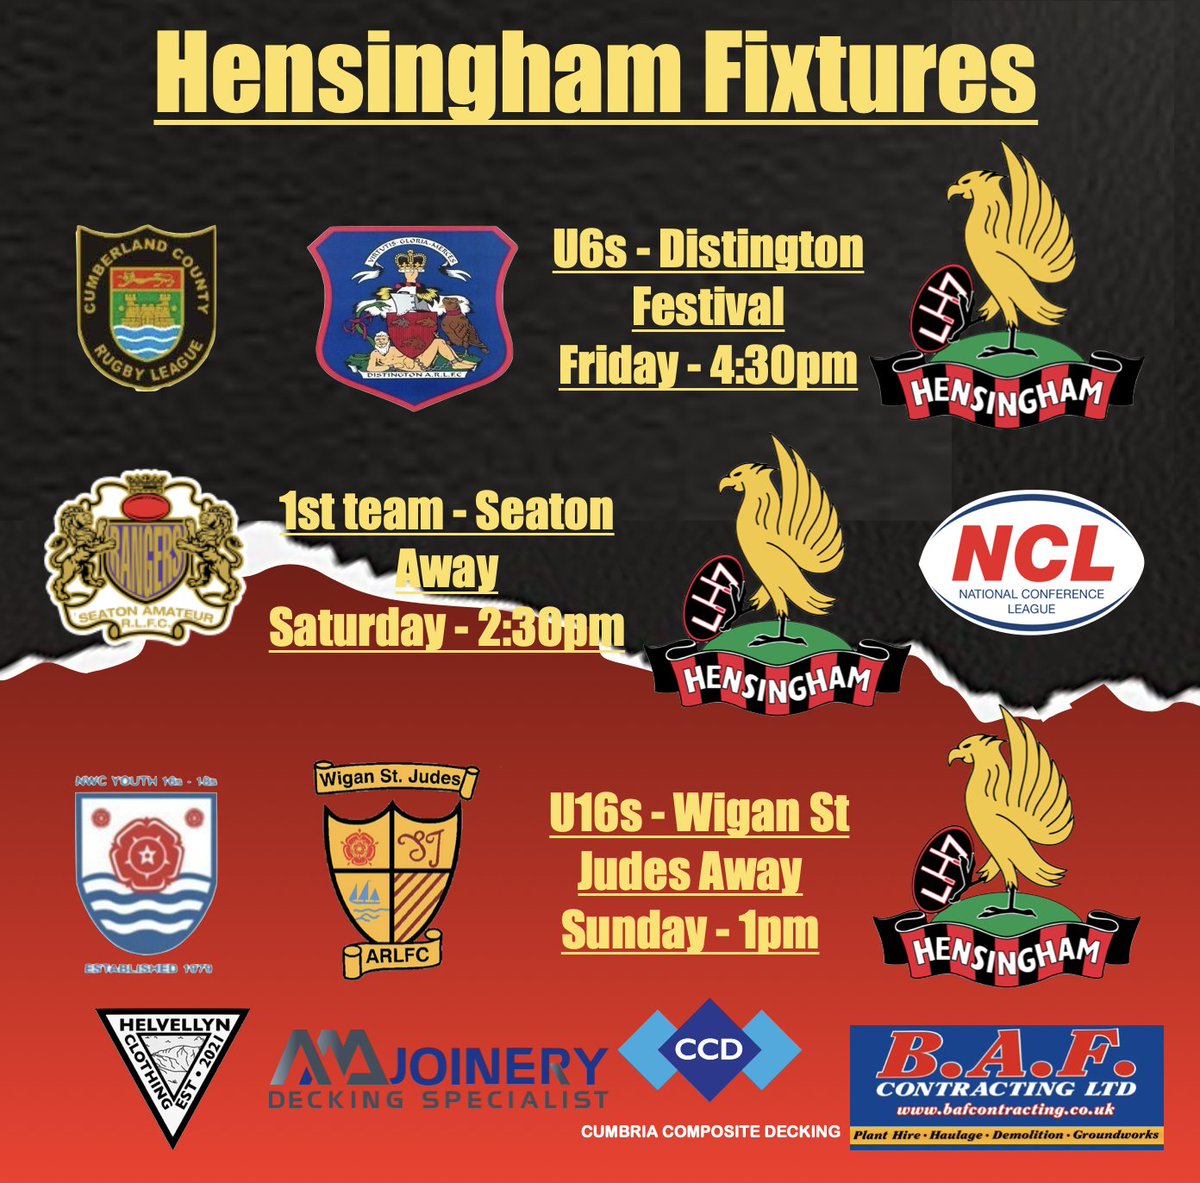 More fantastic fixtures this week: Fri - U6s @DistingtonARL festival Sat - our @OfficialNCL side take the short trip to @SeatonRangersRL Sun - our North West Counties U16s travel to @StJudesOfficial Some great rugby on offer so try & get to the games & shout the teams on 🔴⚫️🏉😀